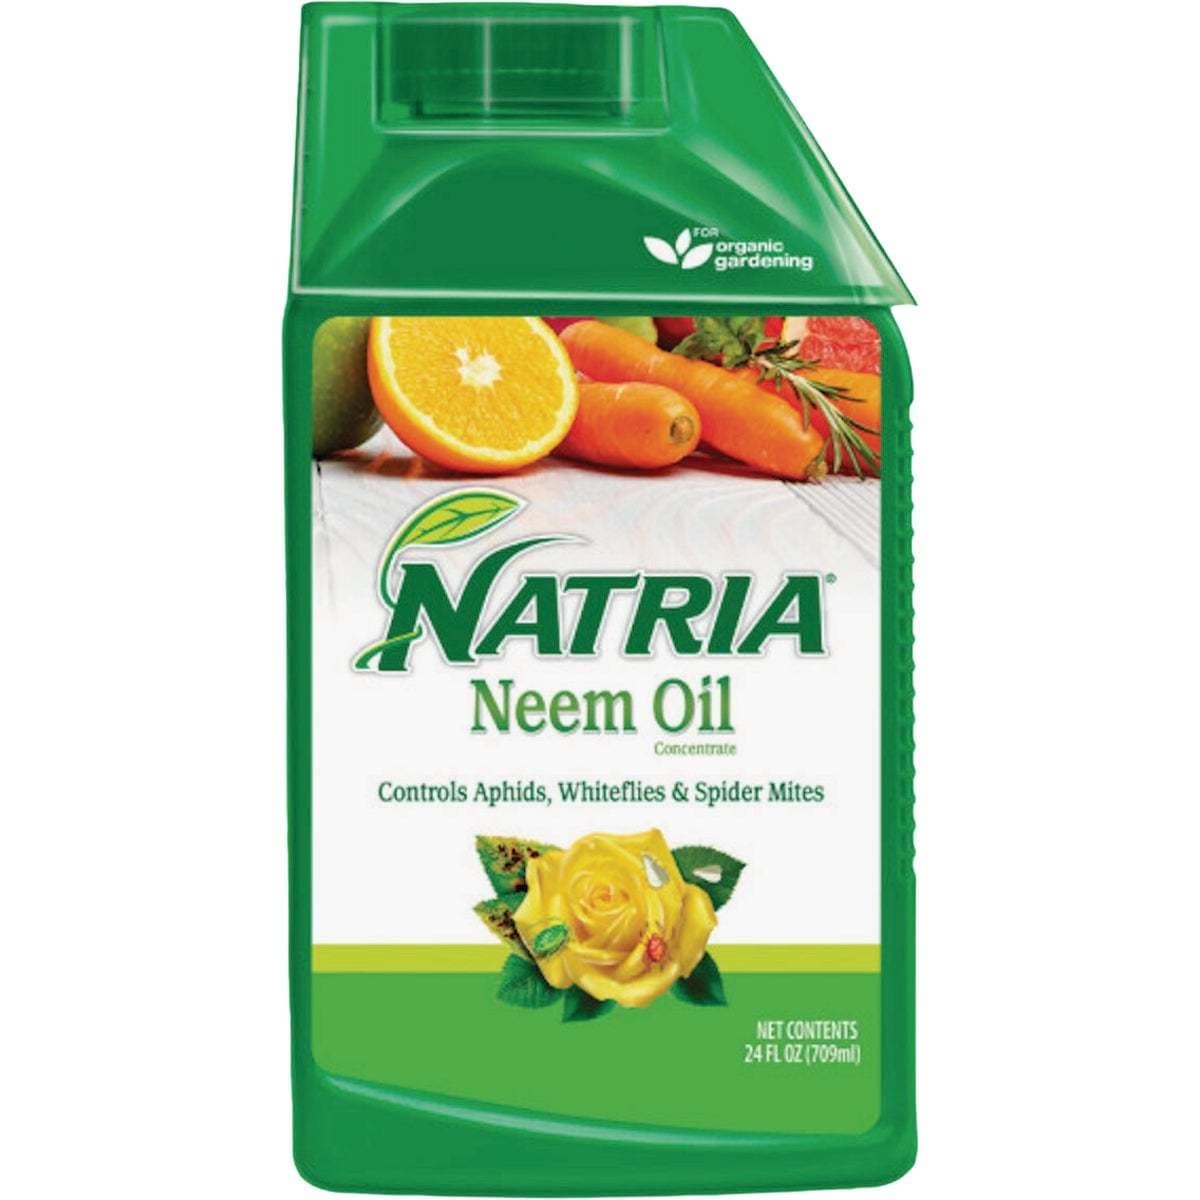 Natria 24 Oz. Concentrate Neem Oil Insect & Disease Killer - 1 Each - 24 Oz.